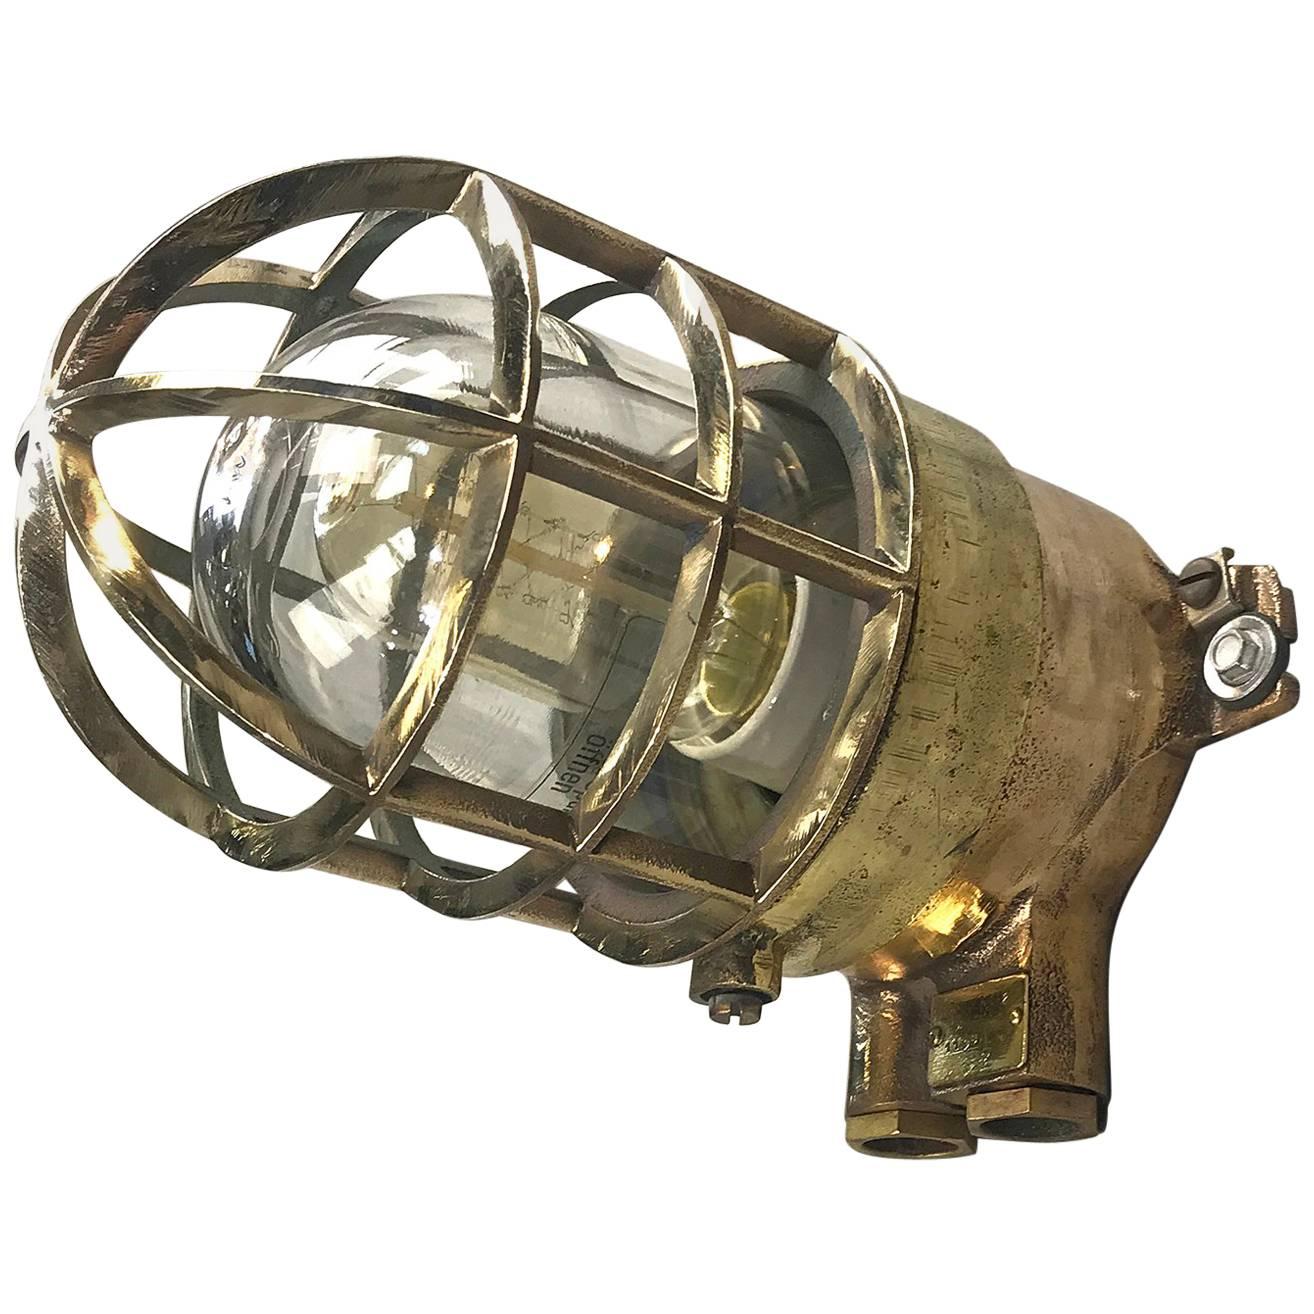 1970s German Explosion Proof Wall Light Cast Bronze, Brass, Glass Shade & Cage